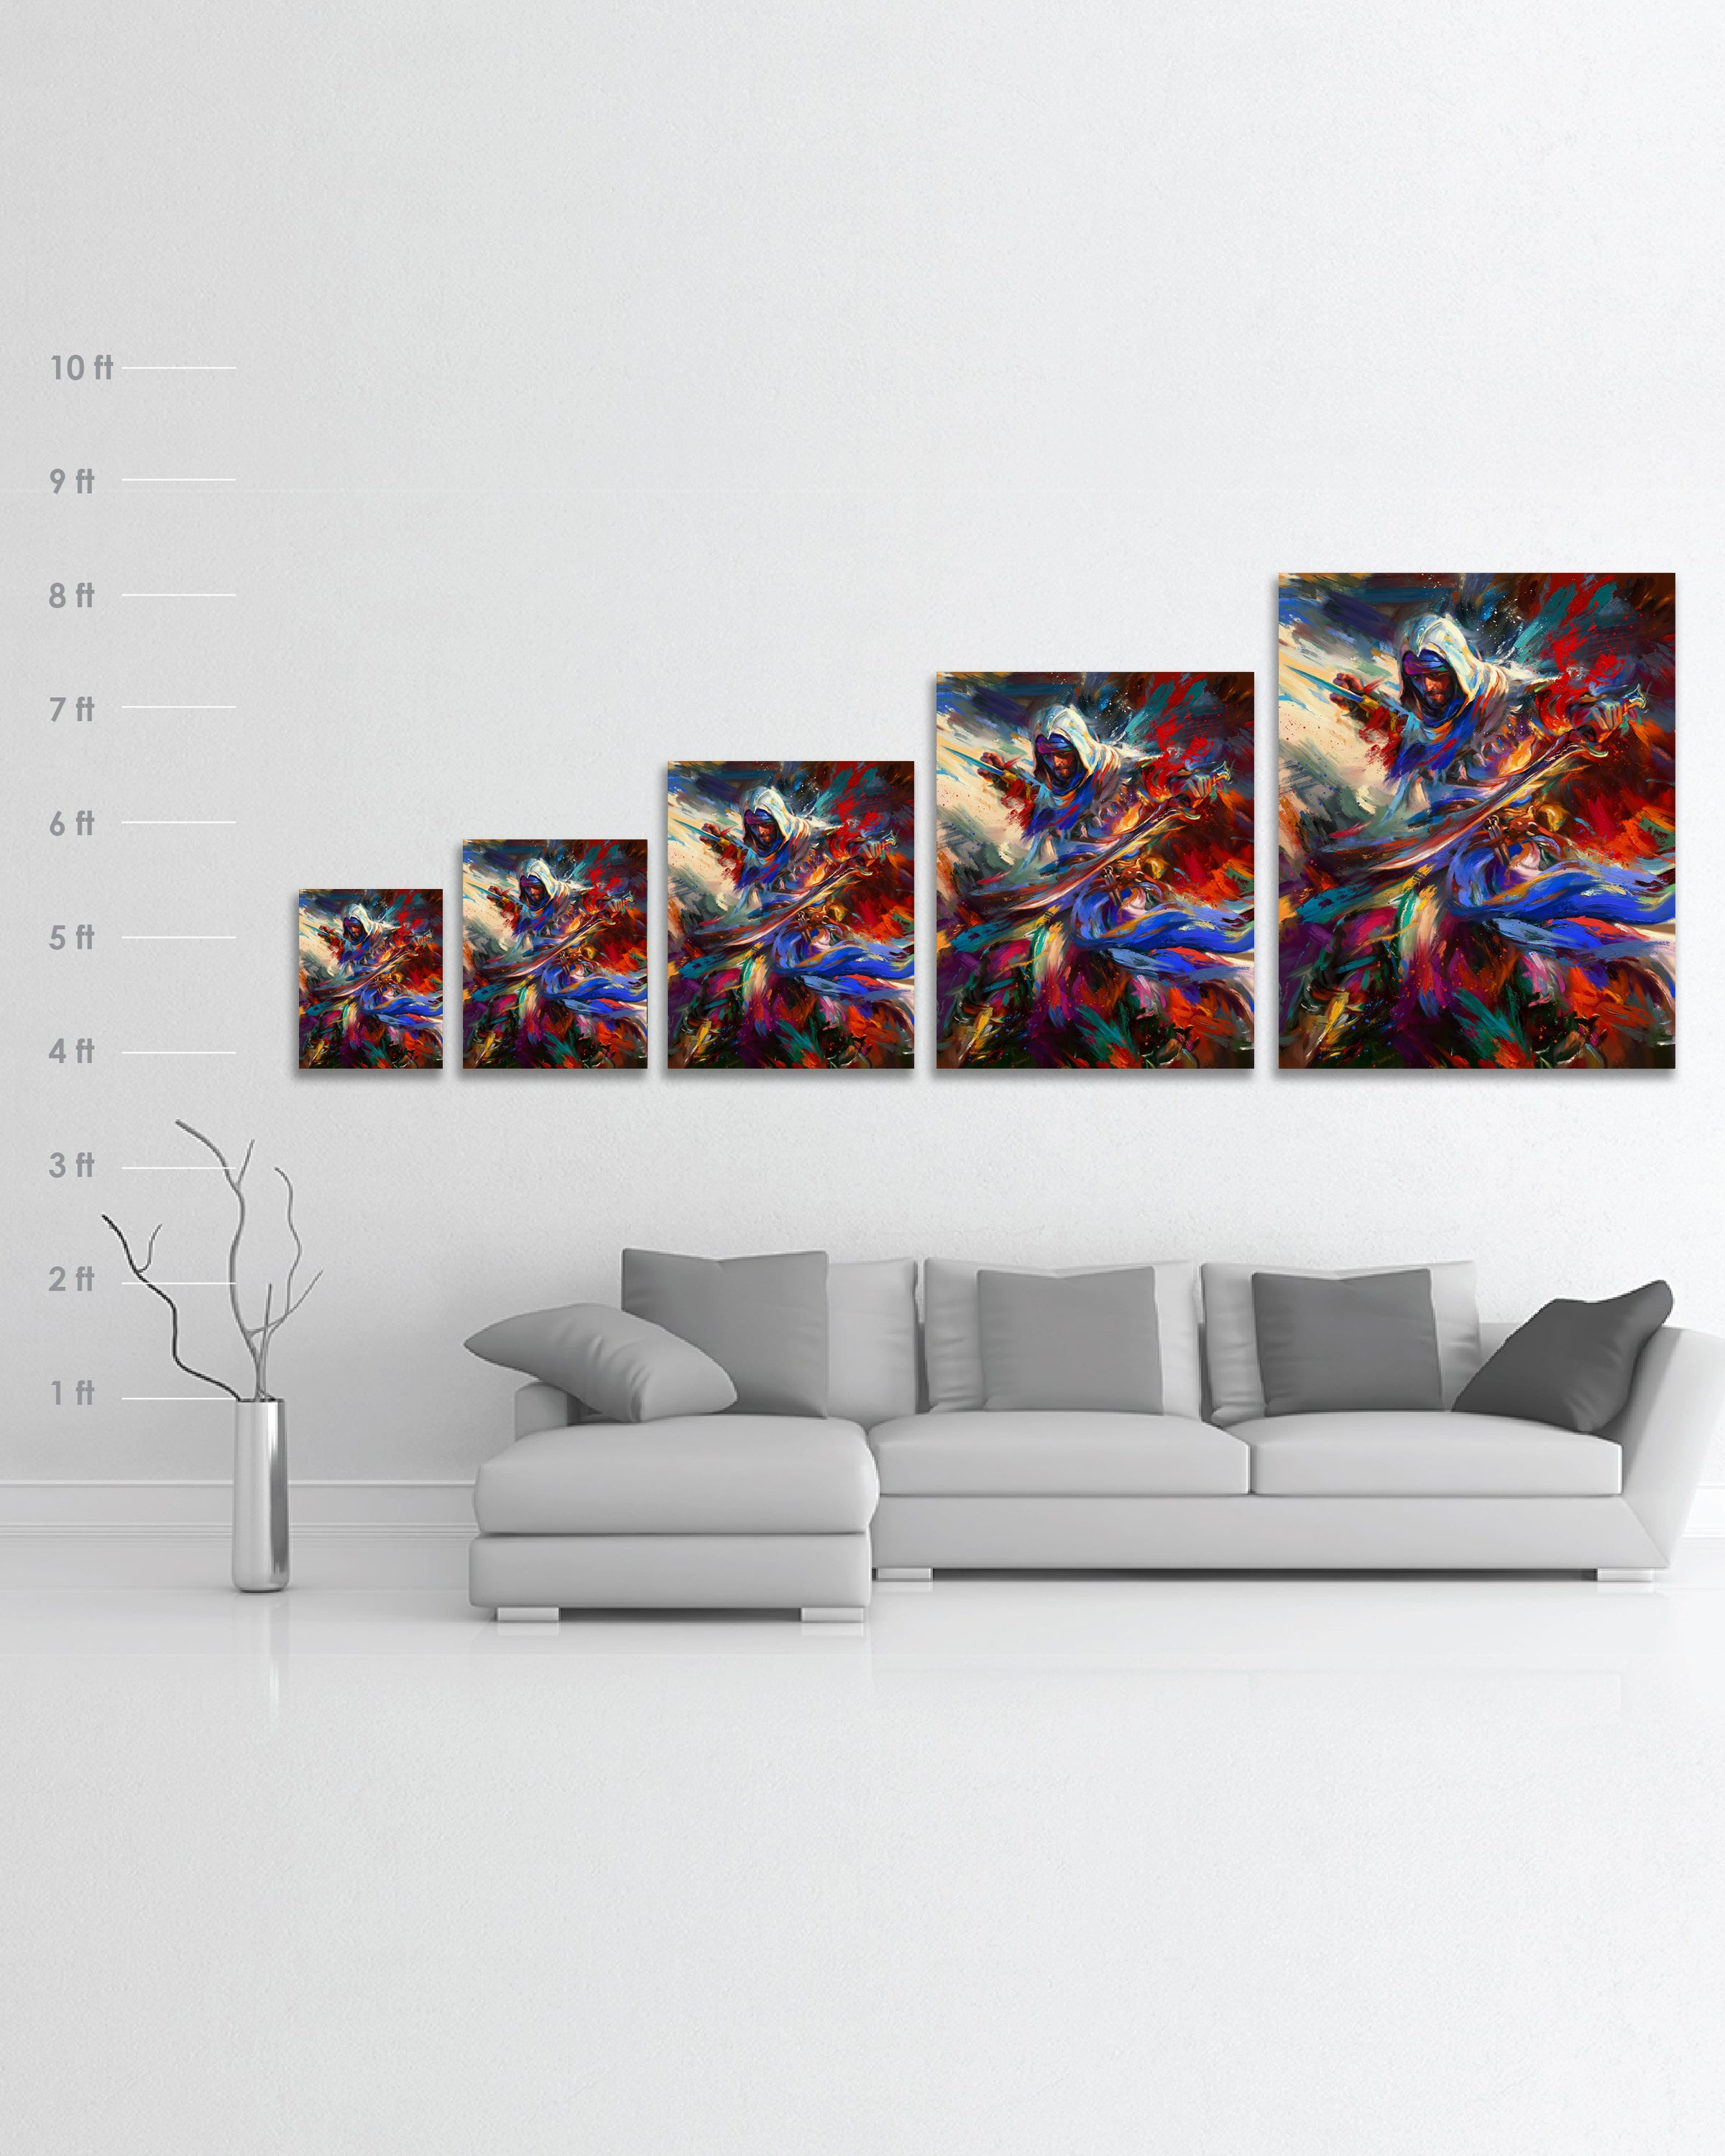 
                  
                    Limited Edition glossy metal print of Assassin's Creed Basim of Mirage bursting forth with energy and painted with colorful brushstrokes in an expressionistic style in a room setting with scale dimensions.
                  
                